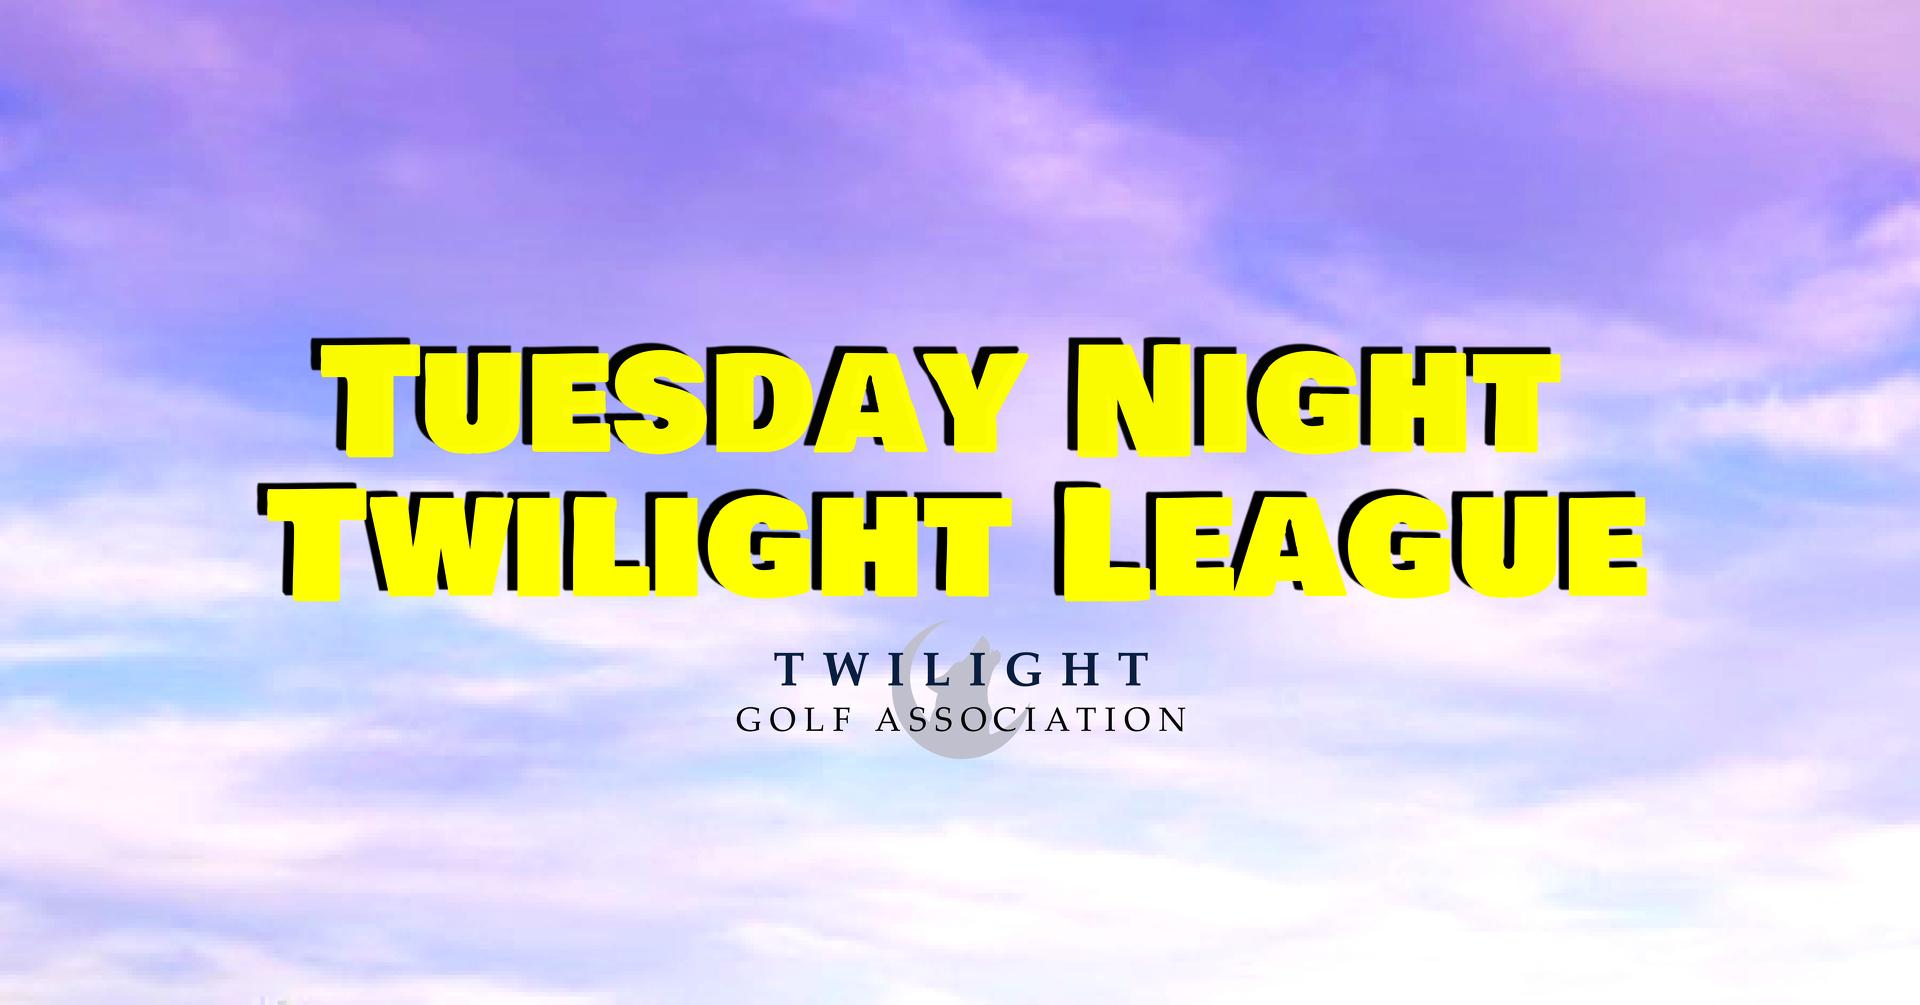 Tuesday Twilight League at Duck Creek Golf Course